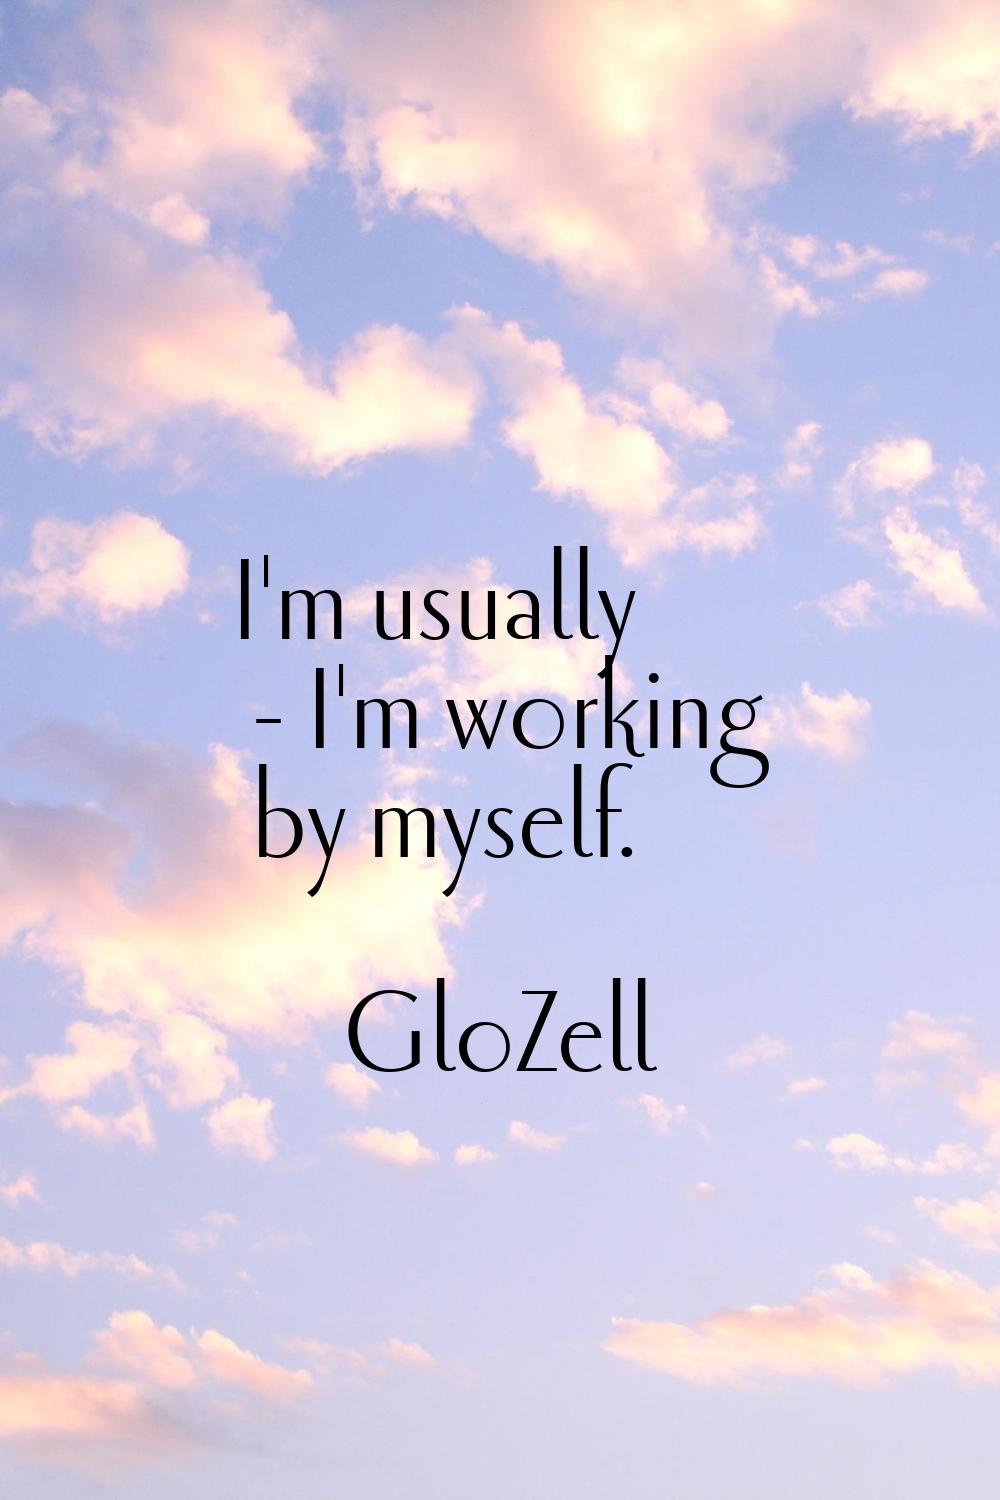 I'm usually - I'm working by myself.